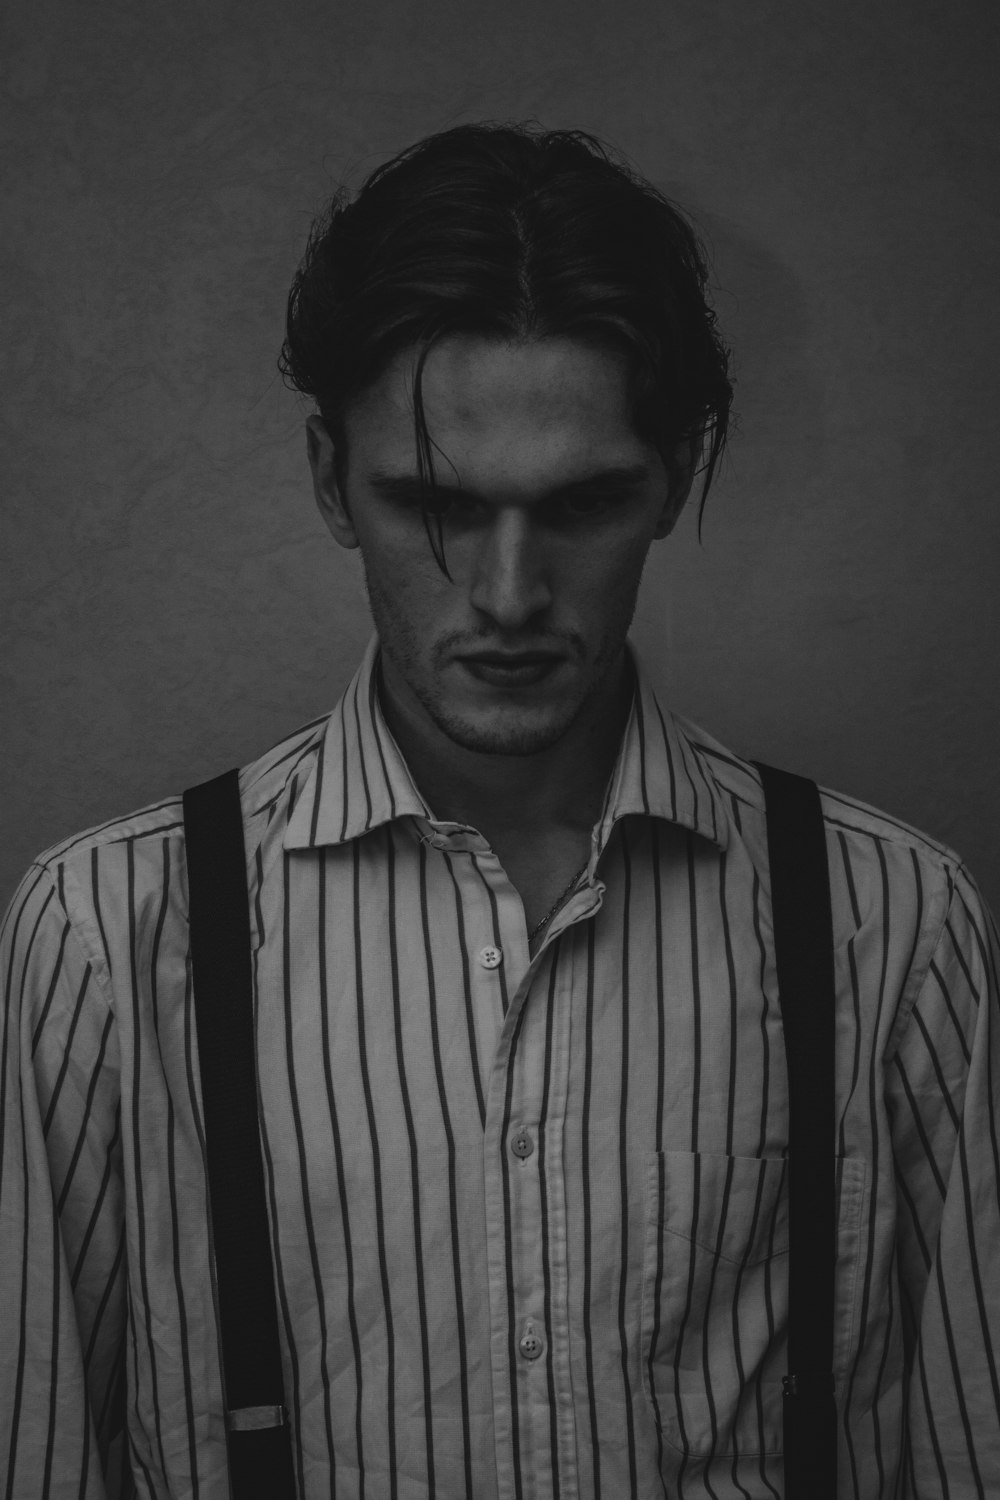 a man with suspenders and a striped shirt